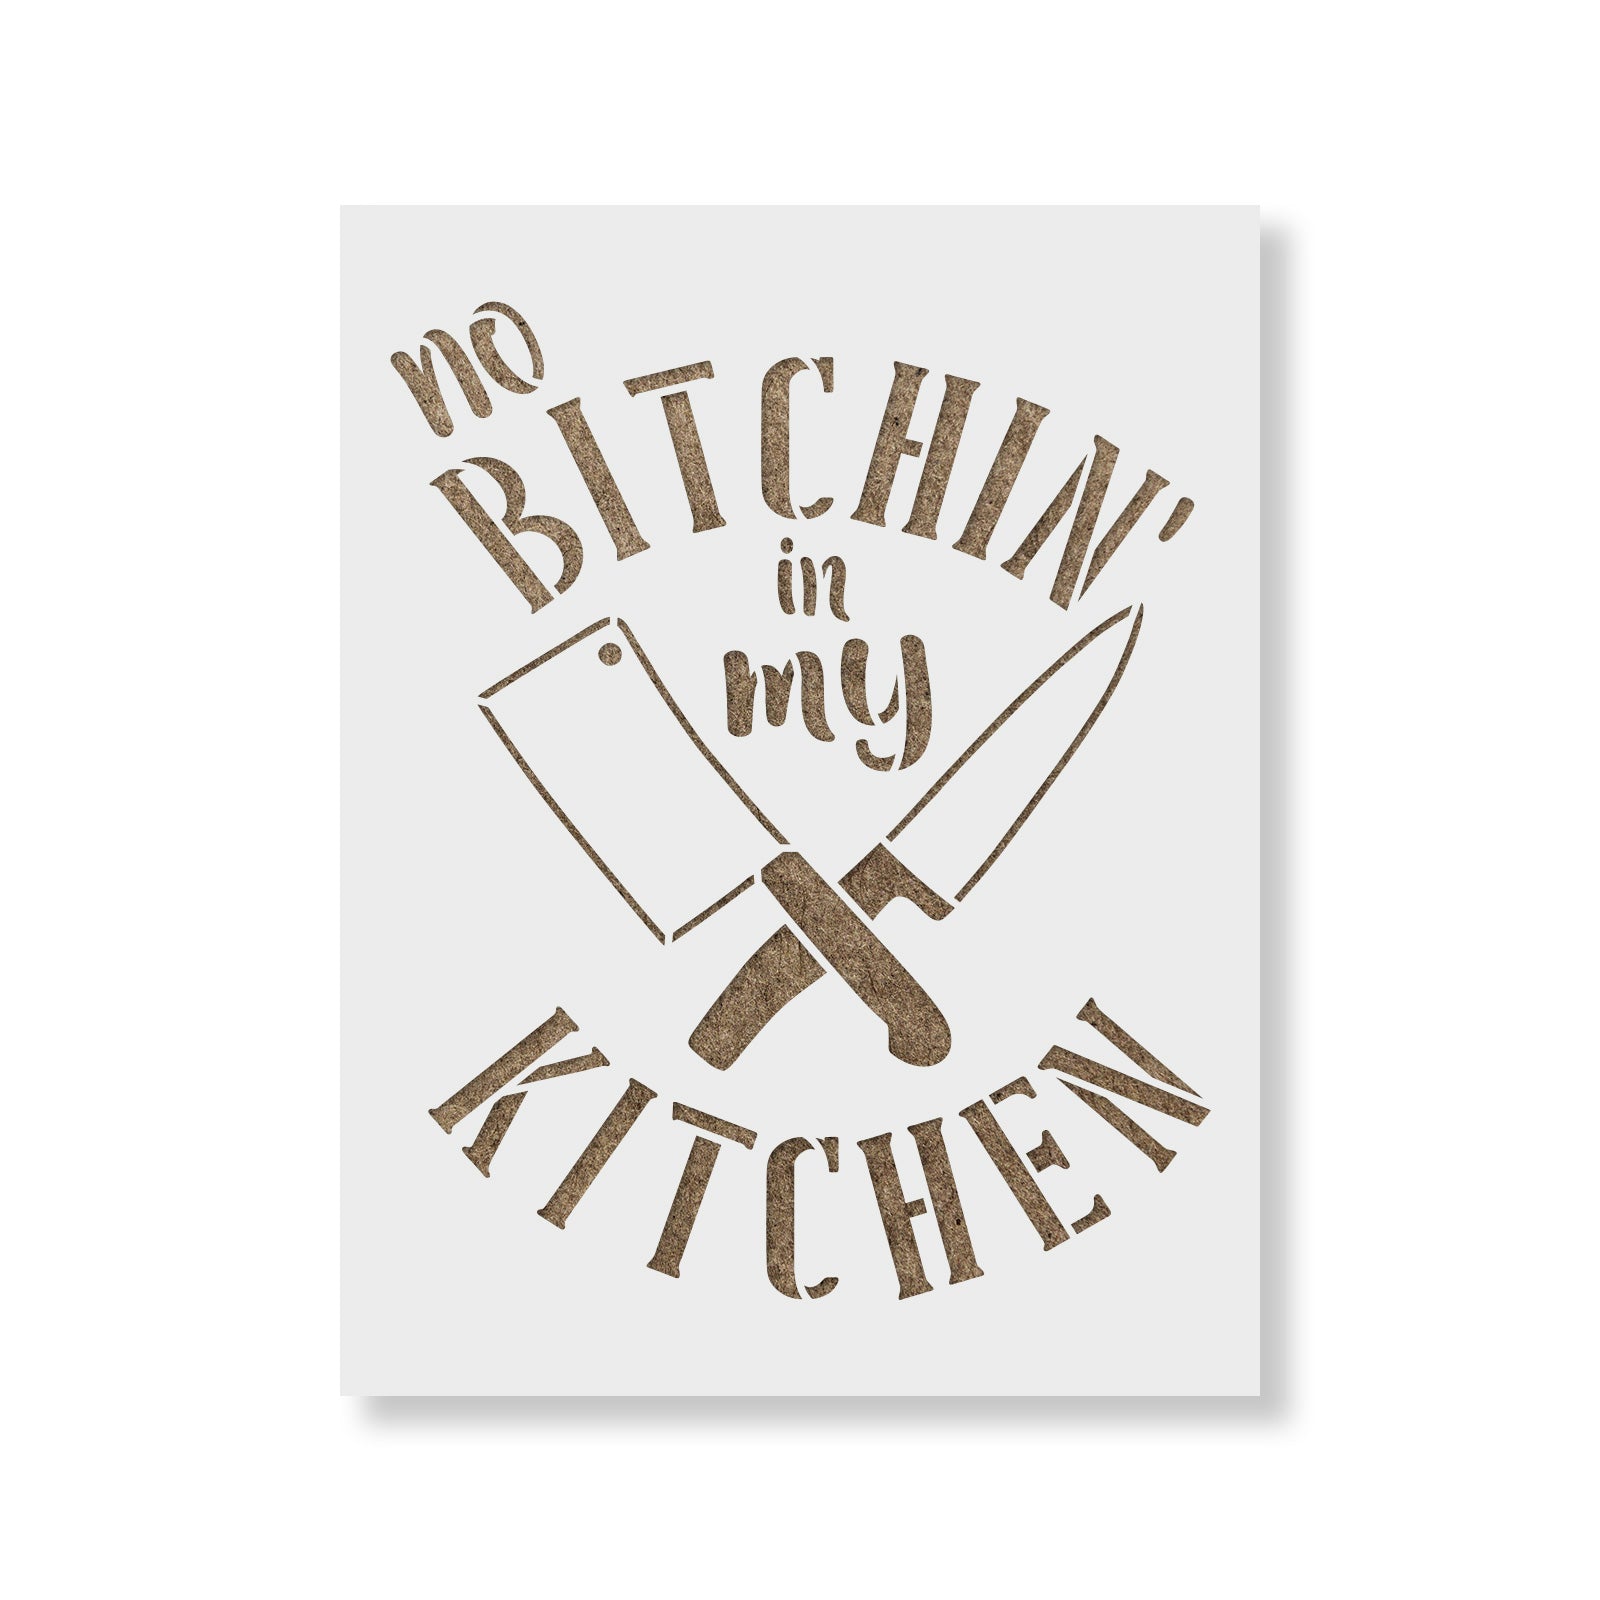 No Bitchin In My Kitchen, Funny kitchen decor – Woodticks Wood'n Signs